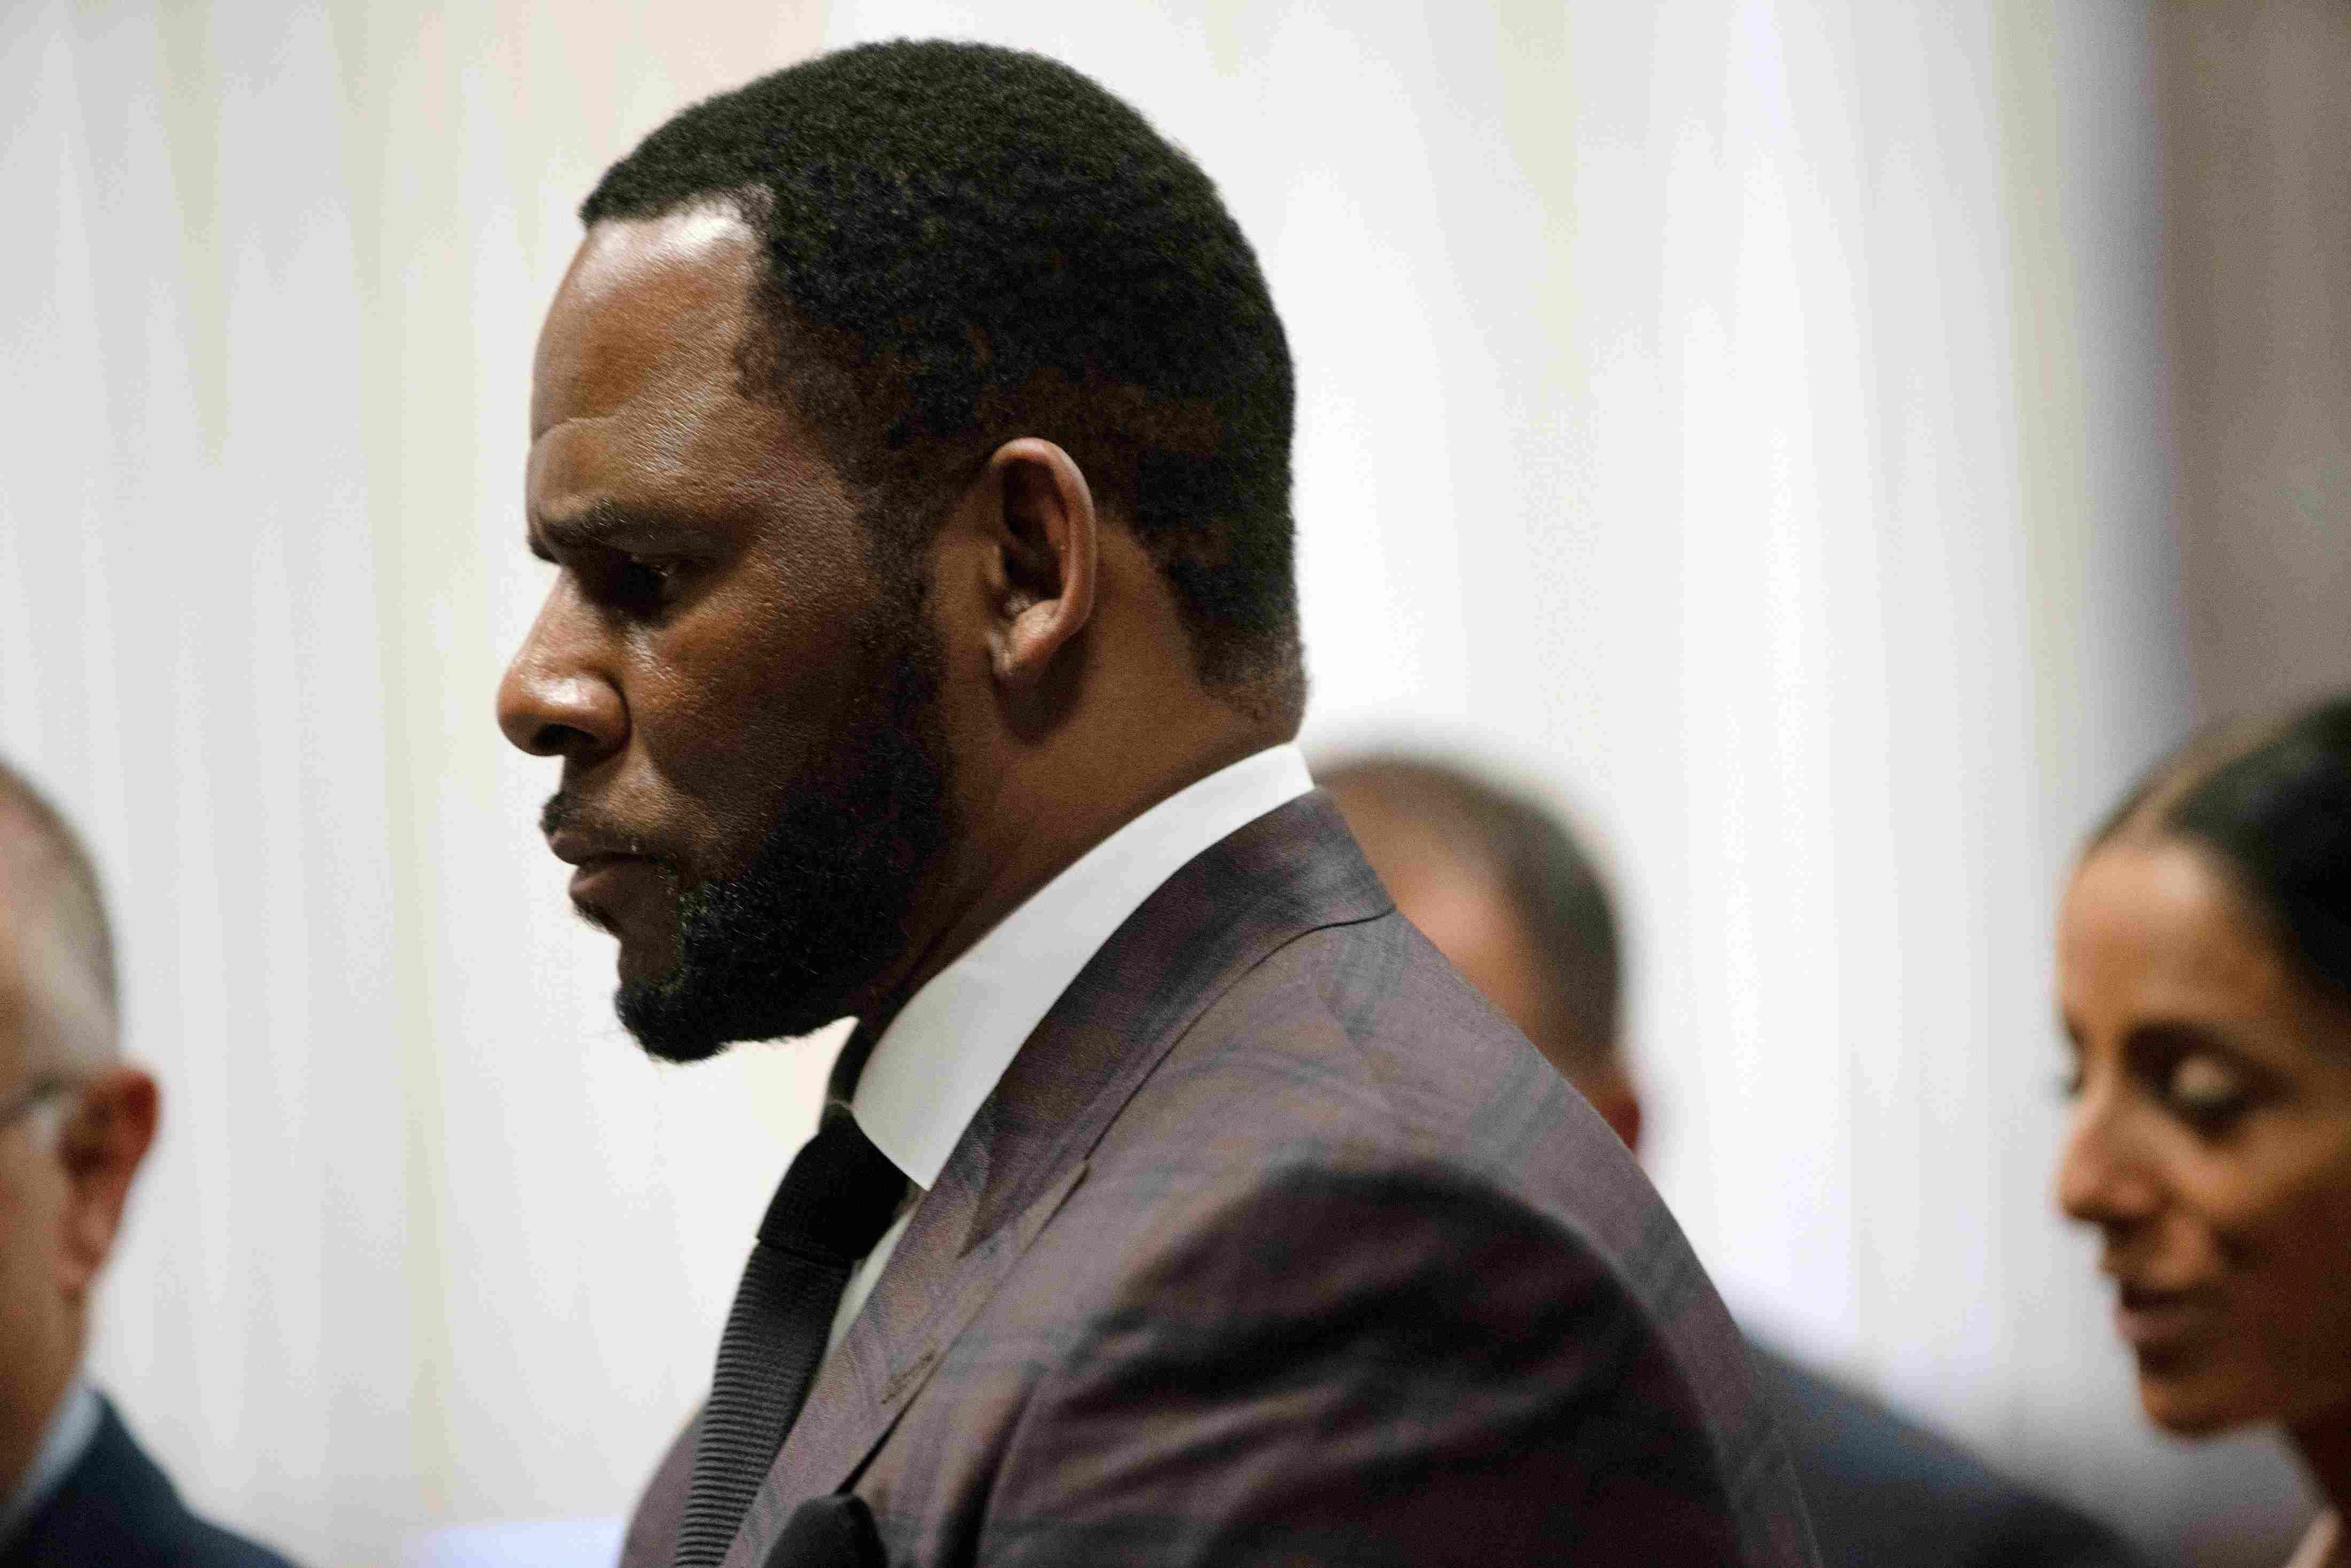 Woman says R. Kelly prostituted her, singer’s lawyer challenges claims